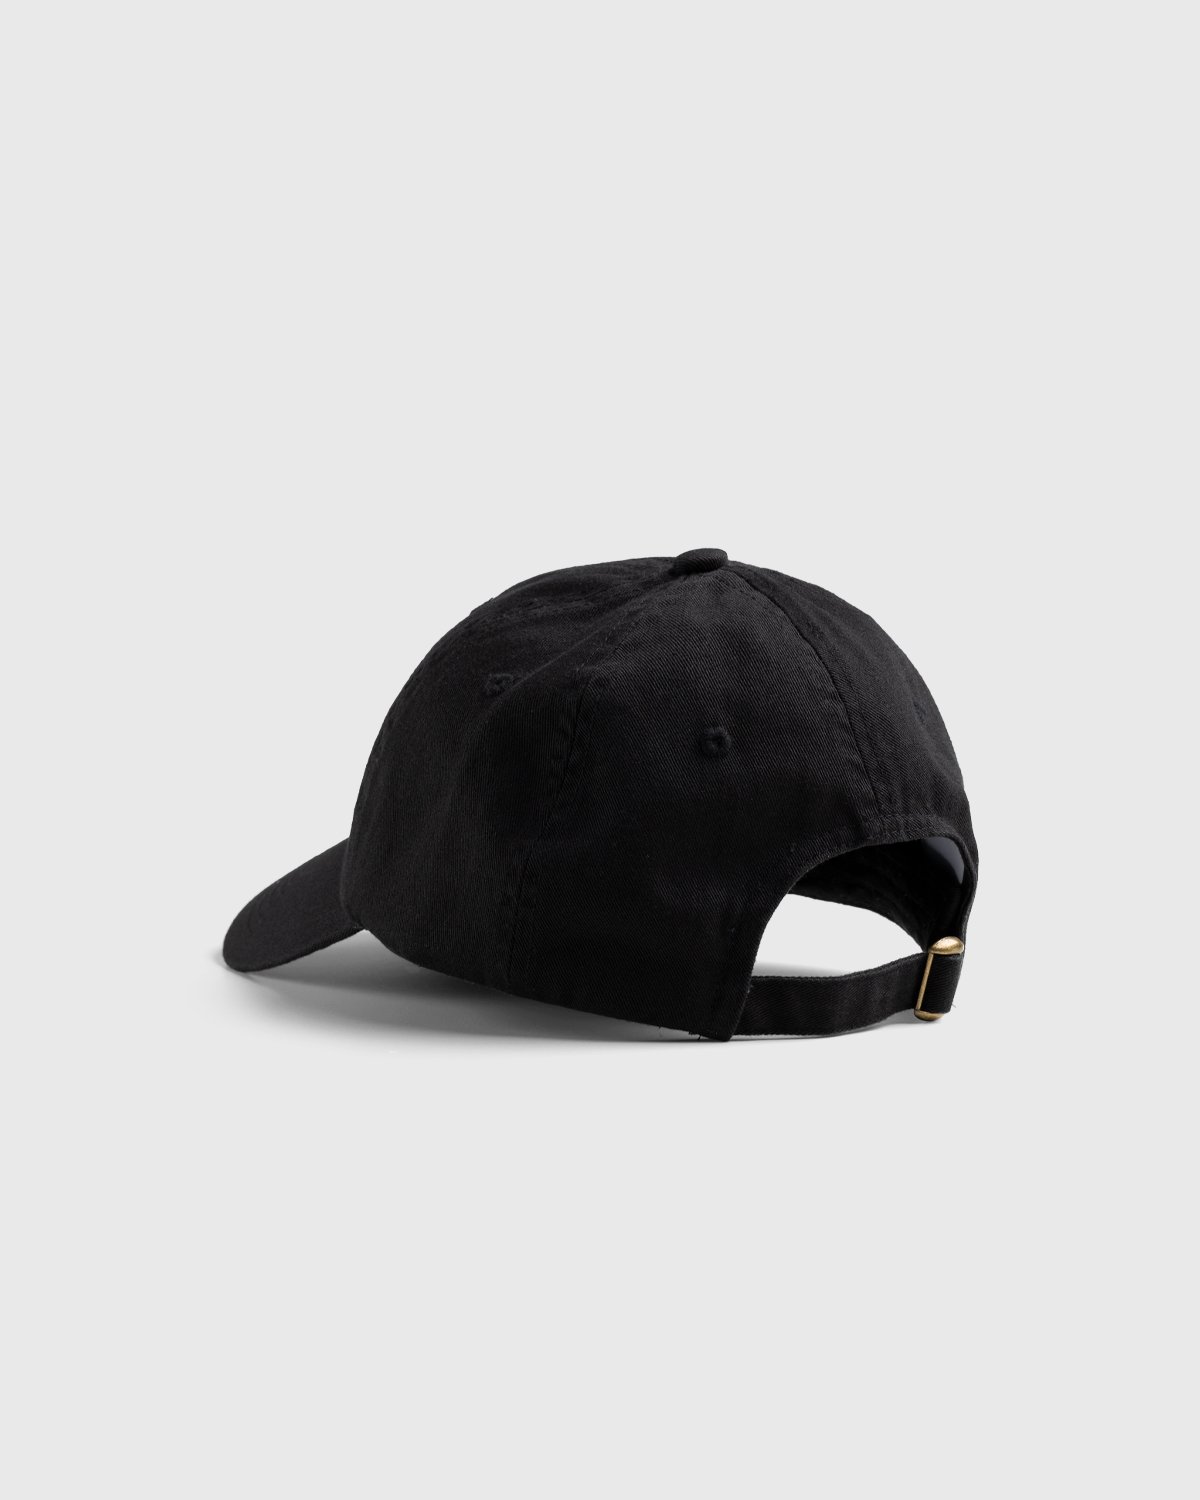 HO HO COCO - Out of Office Cap Black - Accessories - Black - Image 3